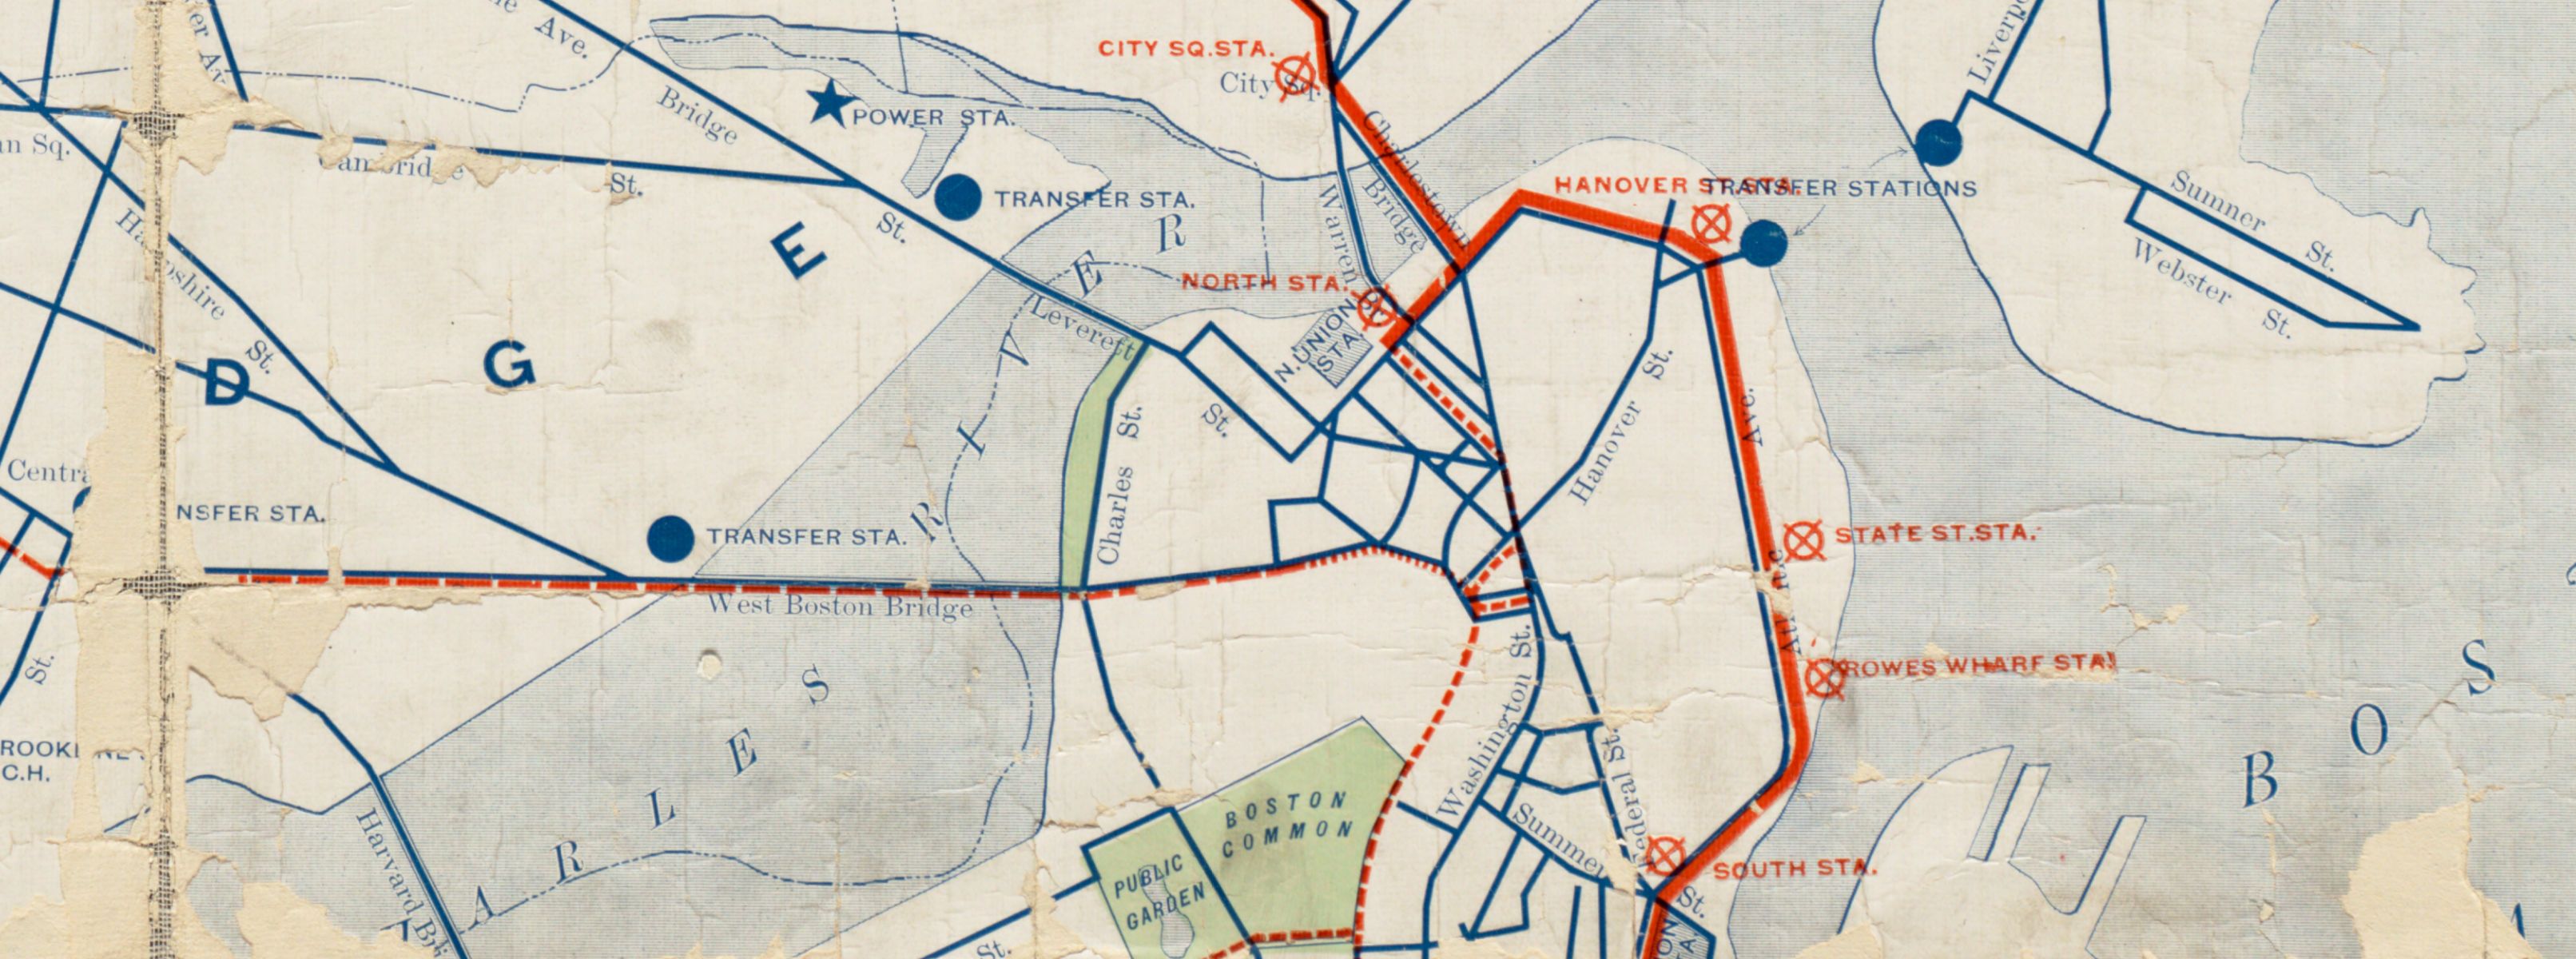 Detail showing the elevated railway line that once ran from North to South Stations, from an 1899 system map.